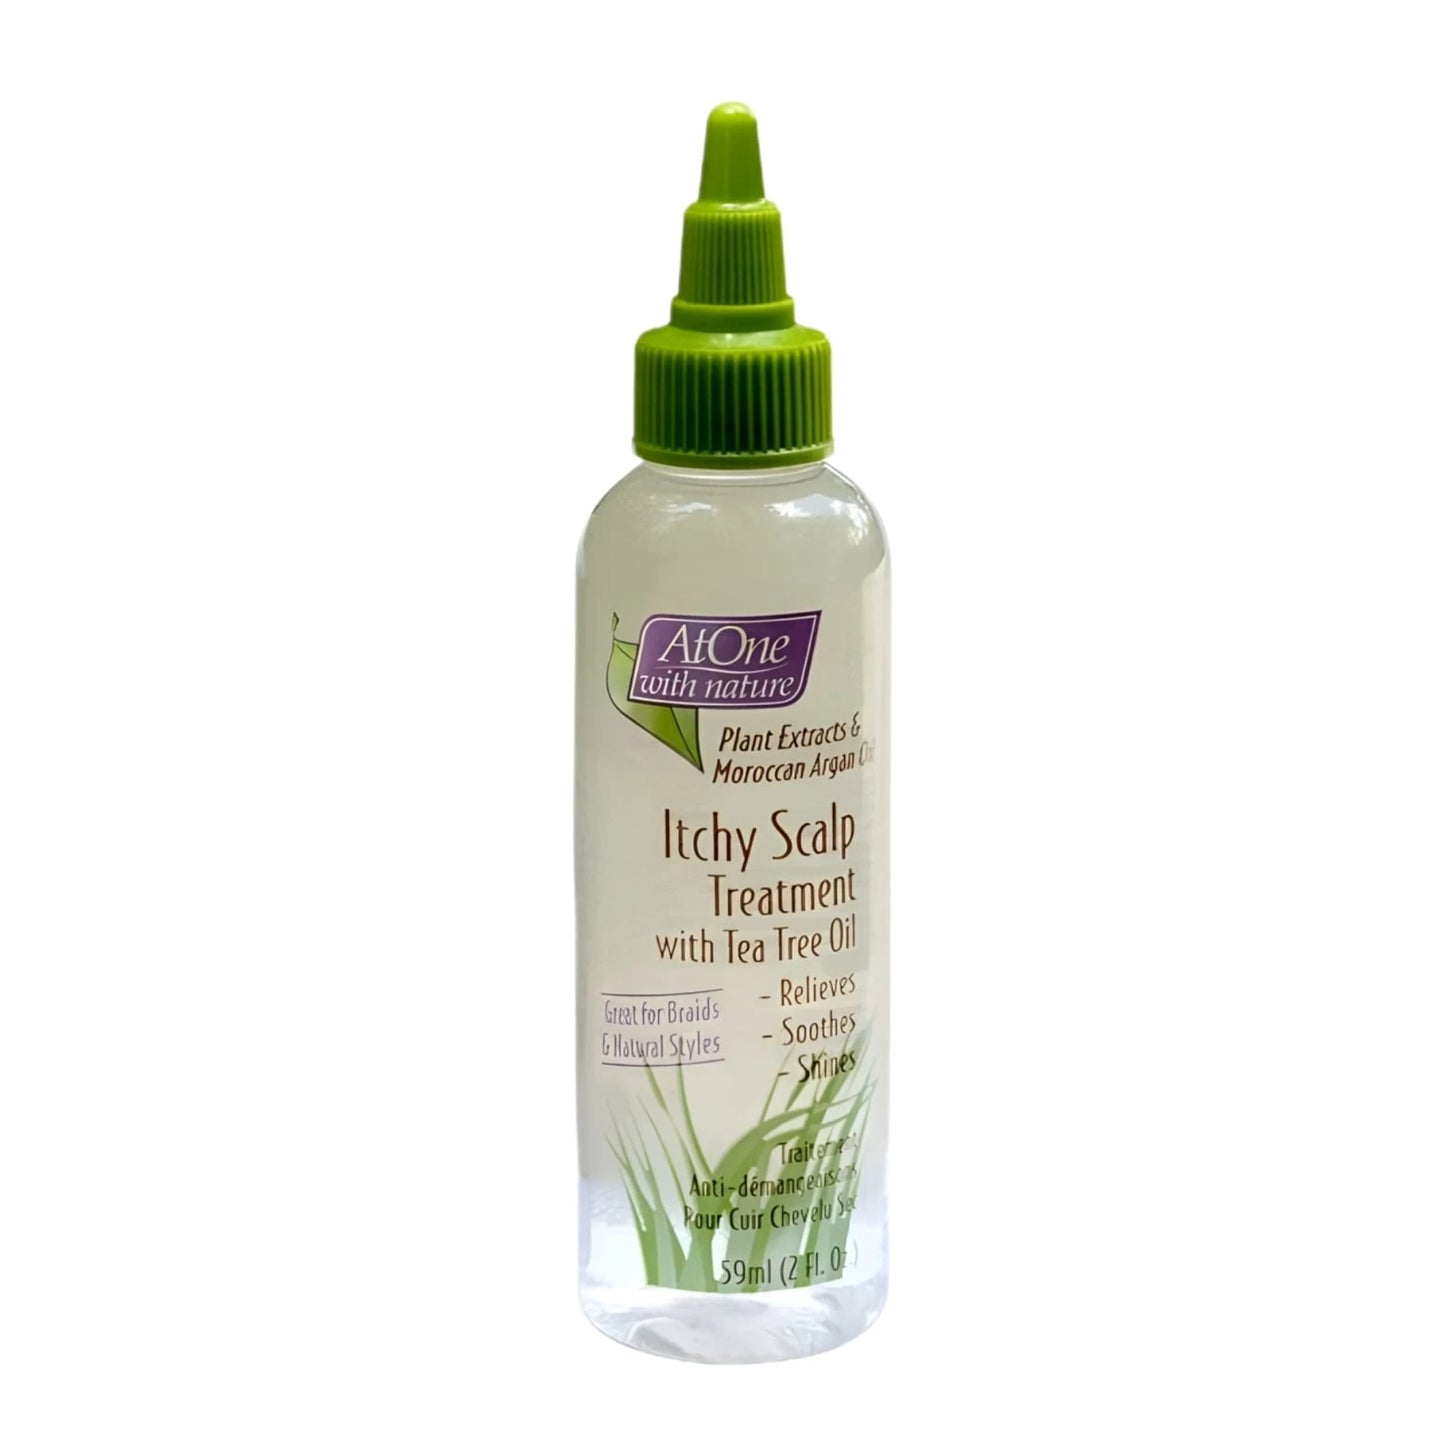 AtOne with Nature Itchy Scalp Treatment with Tea Tree Oil